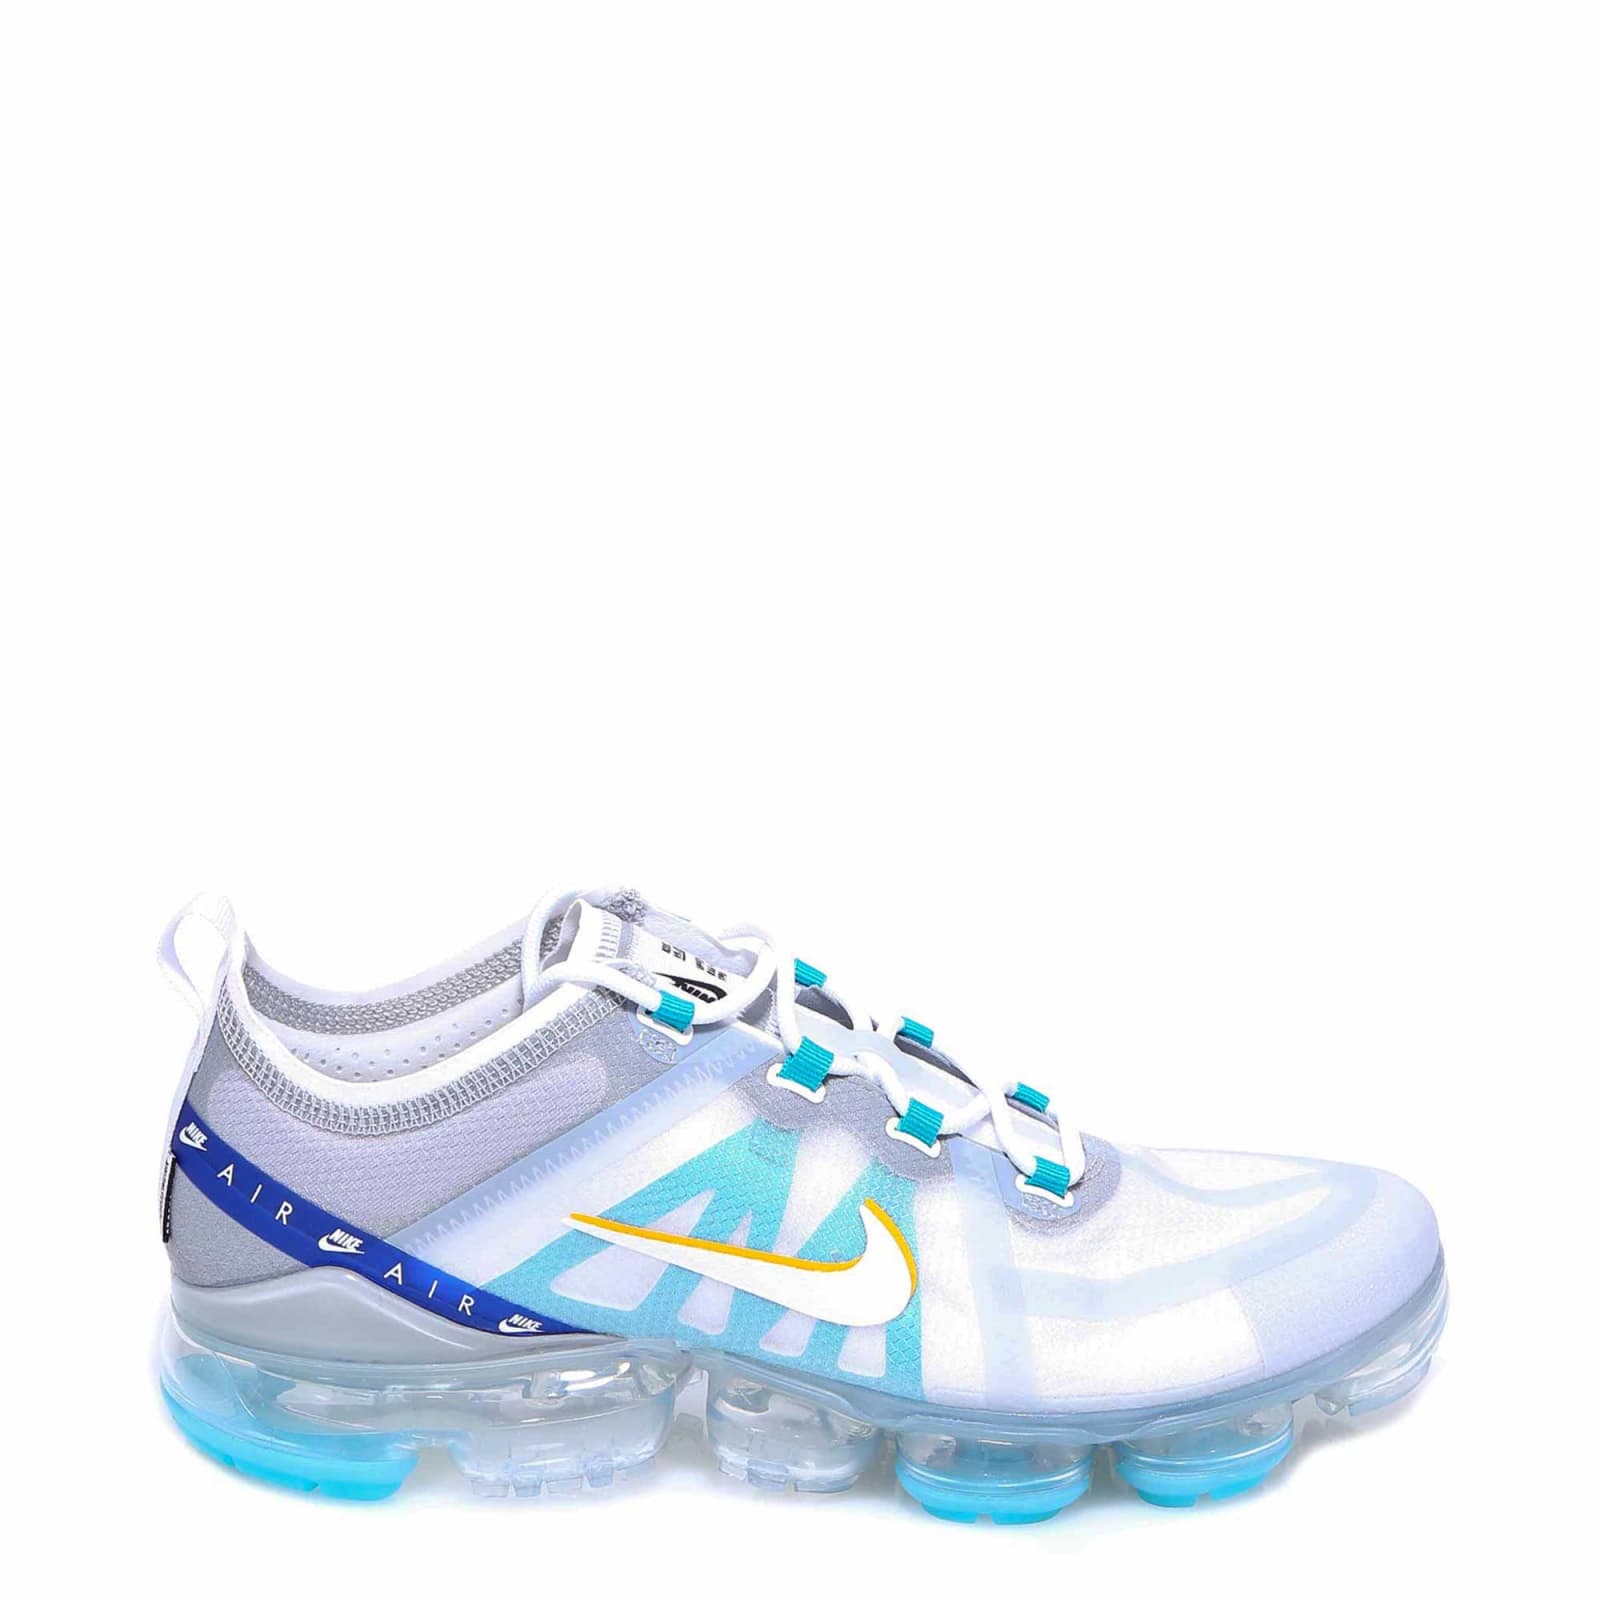 vapormax clear sole